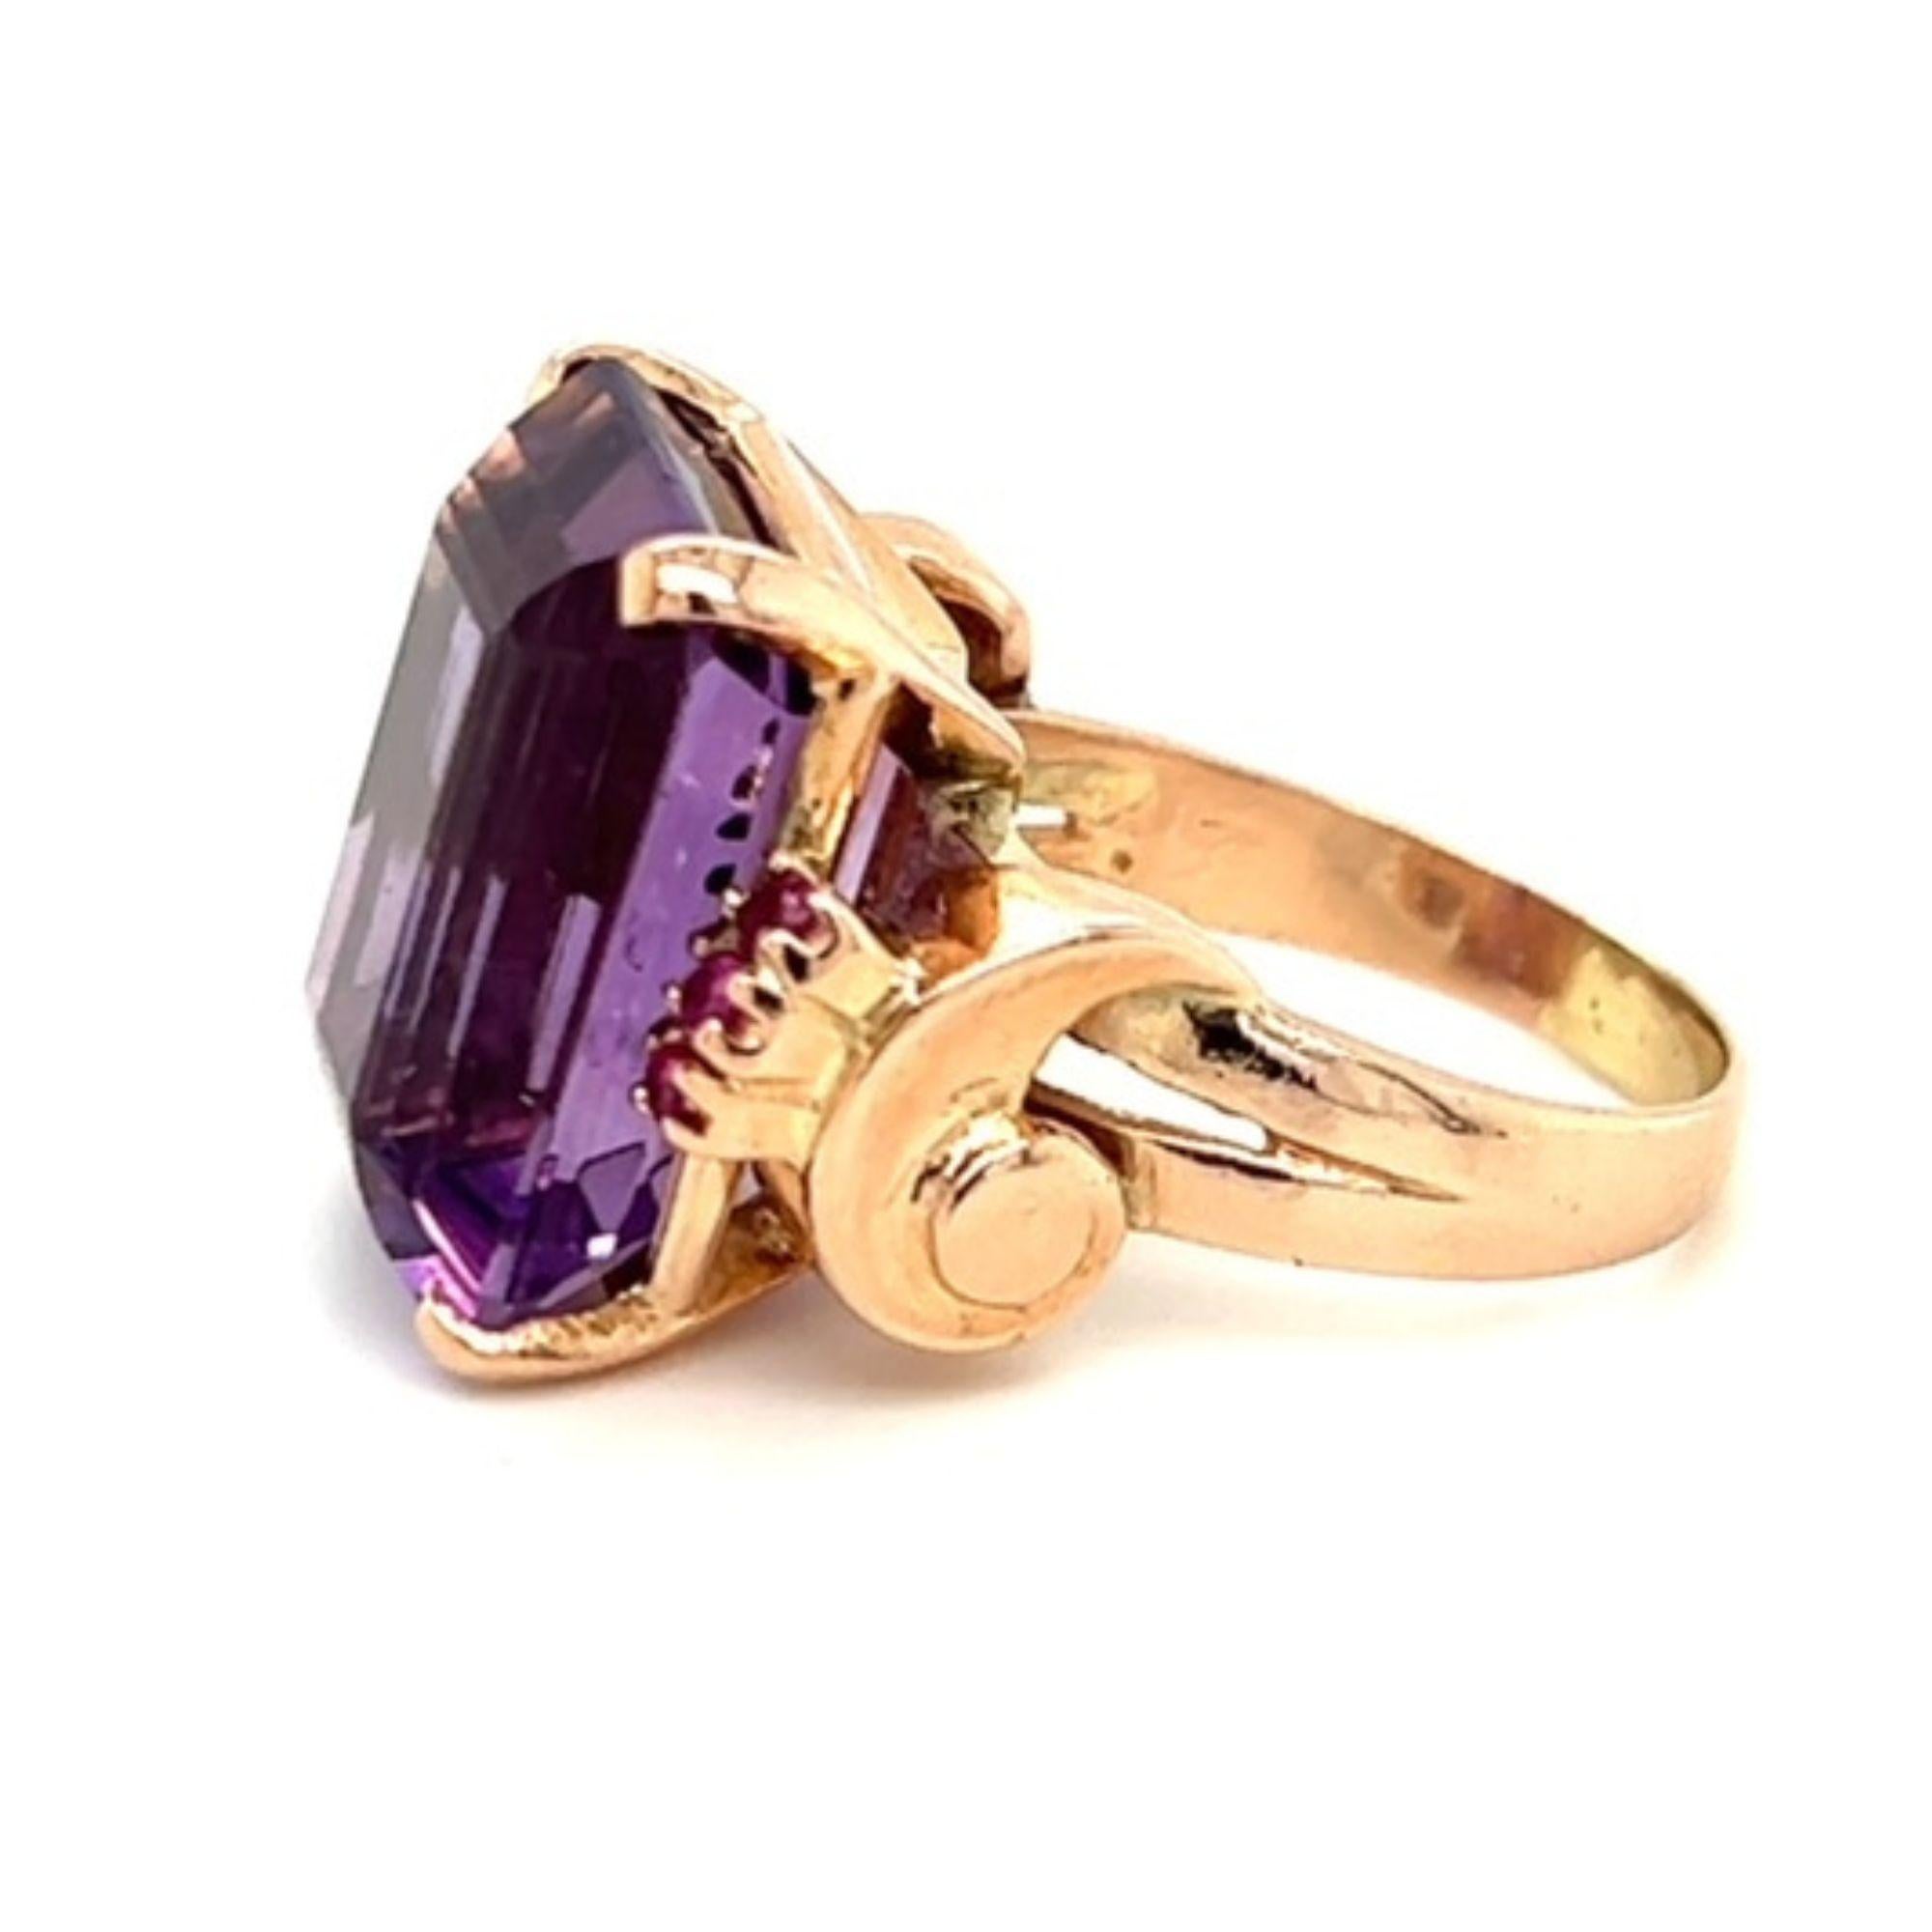 One 14 karat rose gold retro design ring set with one 18.5x14.7mm emerald cut amethyst, flanked by six (6) 2mm round rubies. The ring is a finger size 7.5 and can be resized, however resizing is not included.  The shank is stamped 14K and the ring